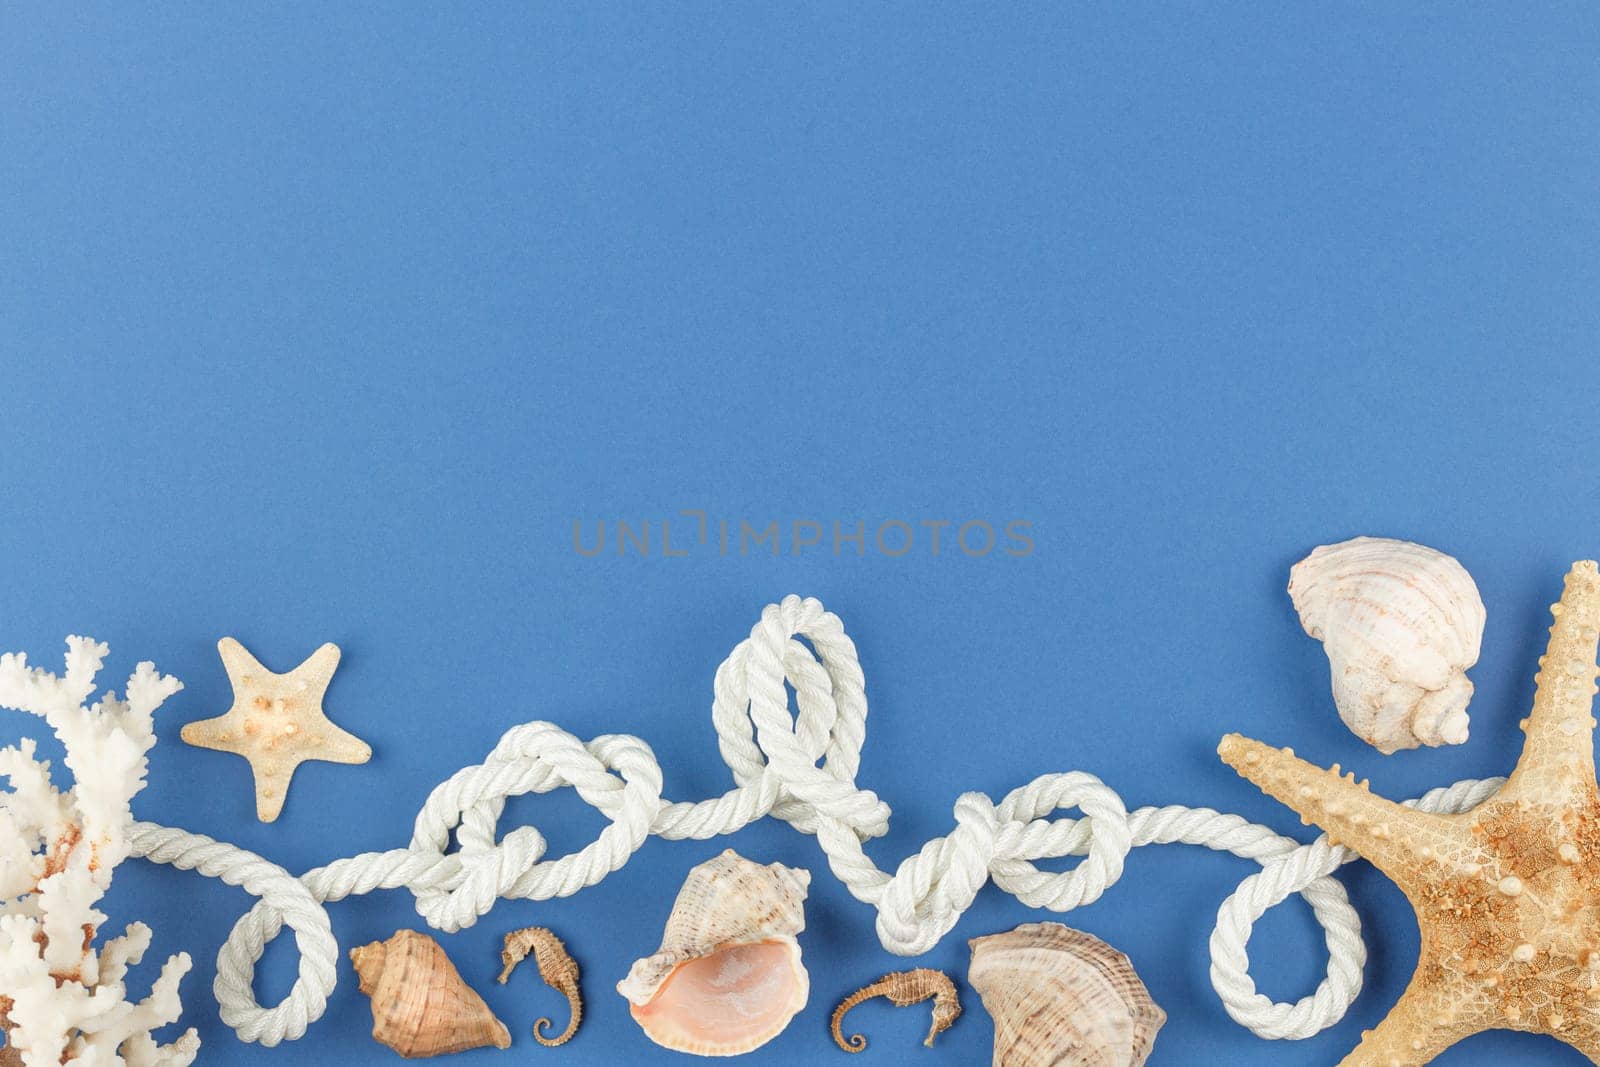 Seashells with starfish on blue isolated background. Top view. Summer beach vacation concept. Marine rope and white corals. Flat lay.